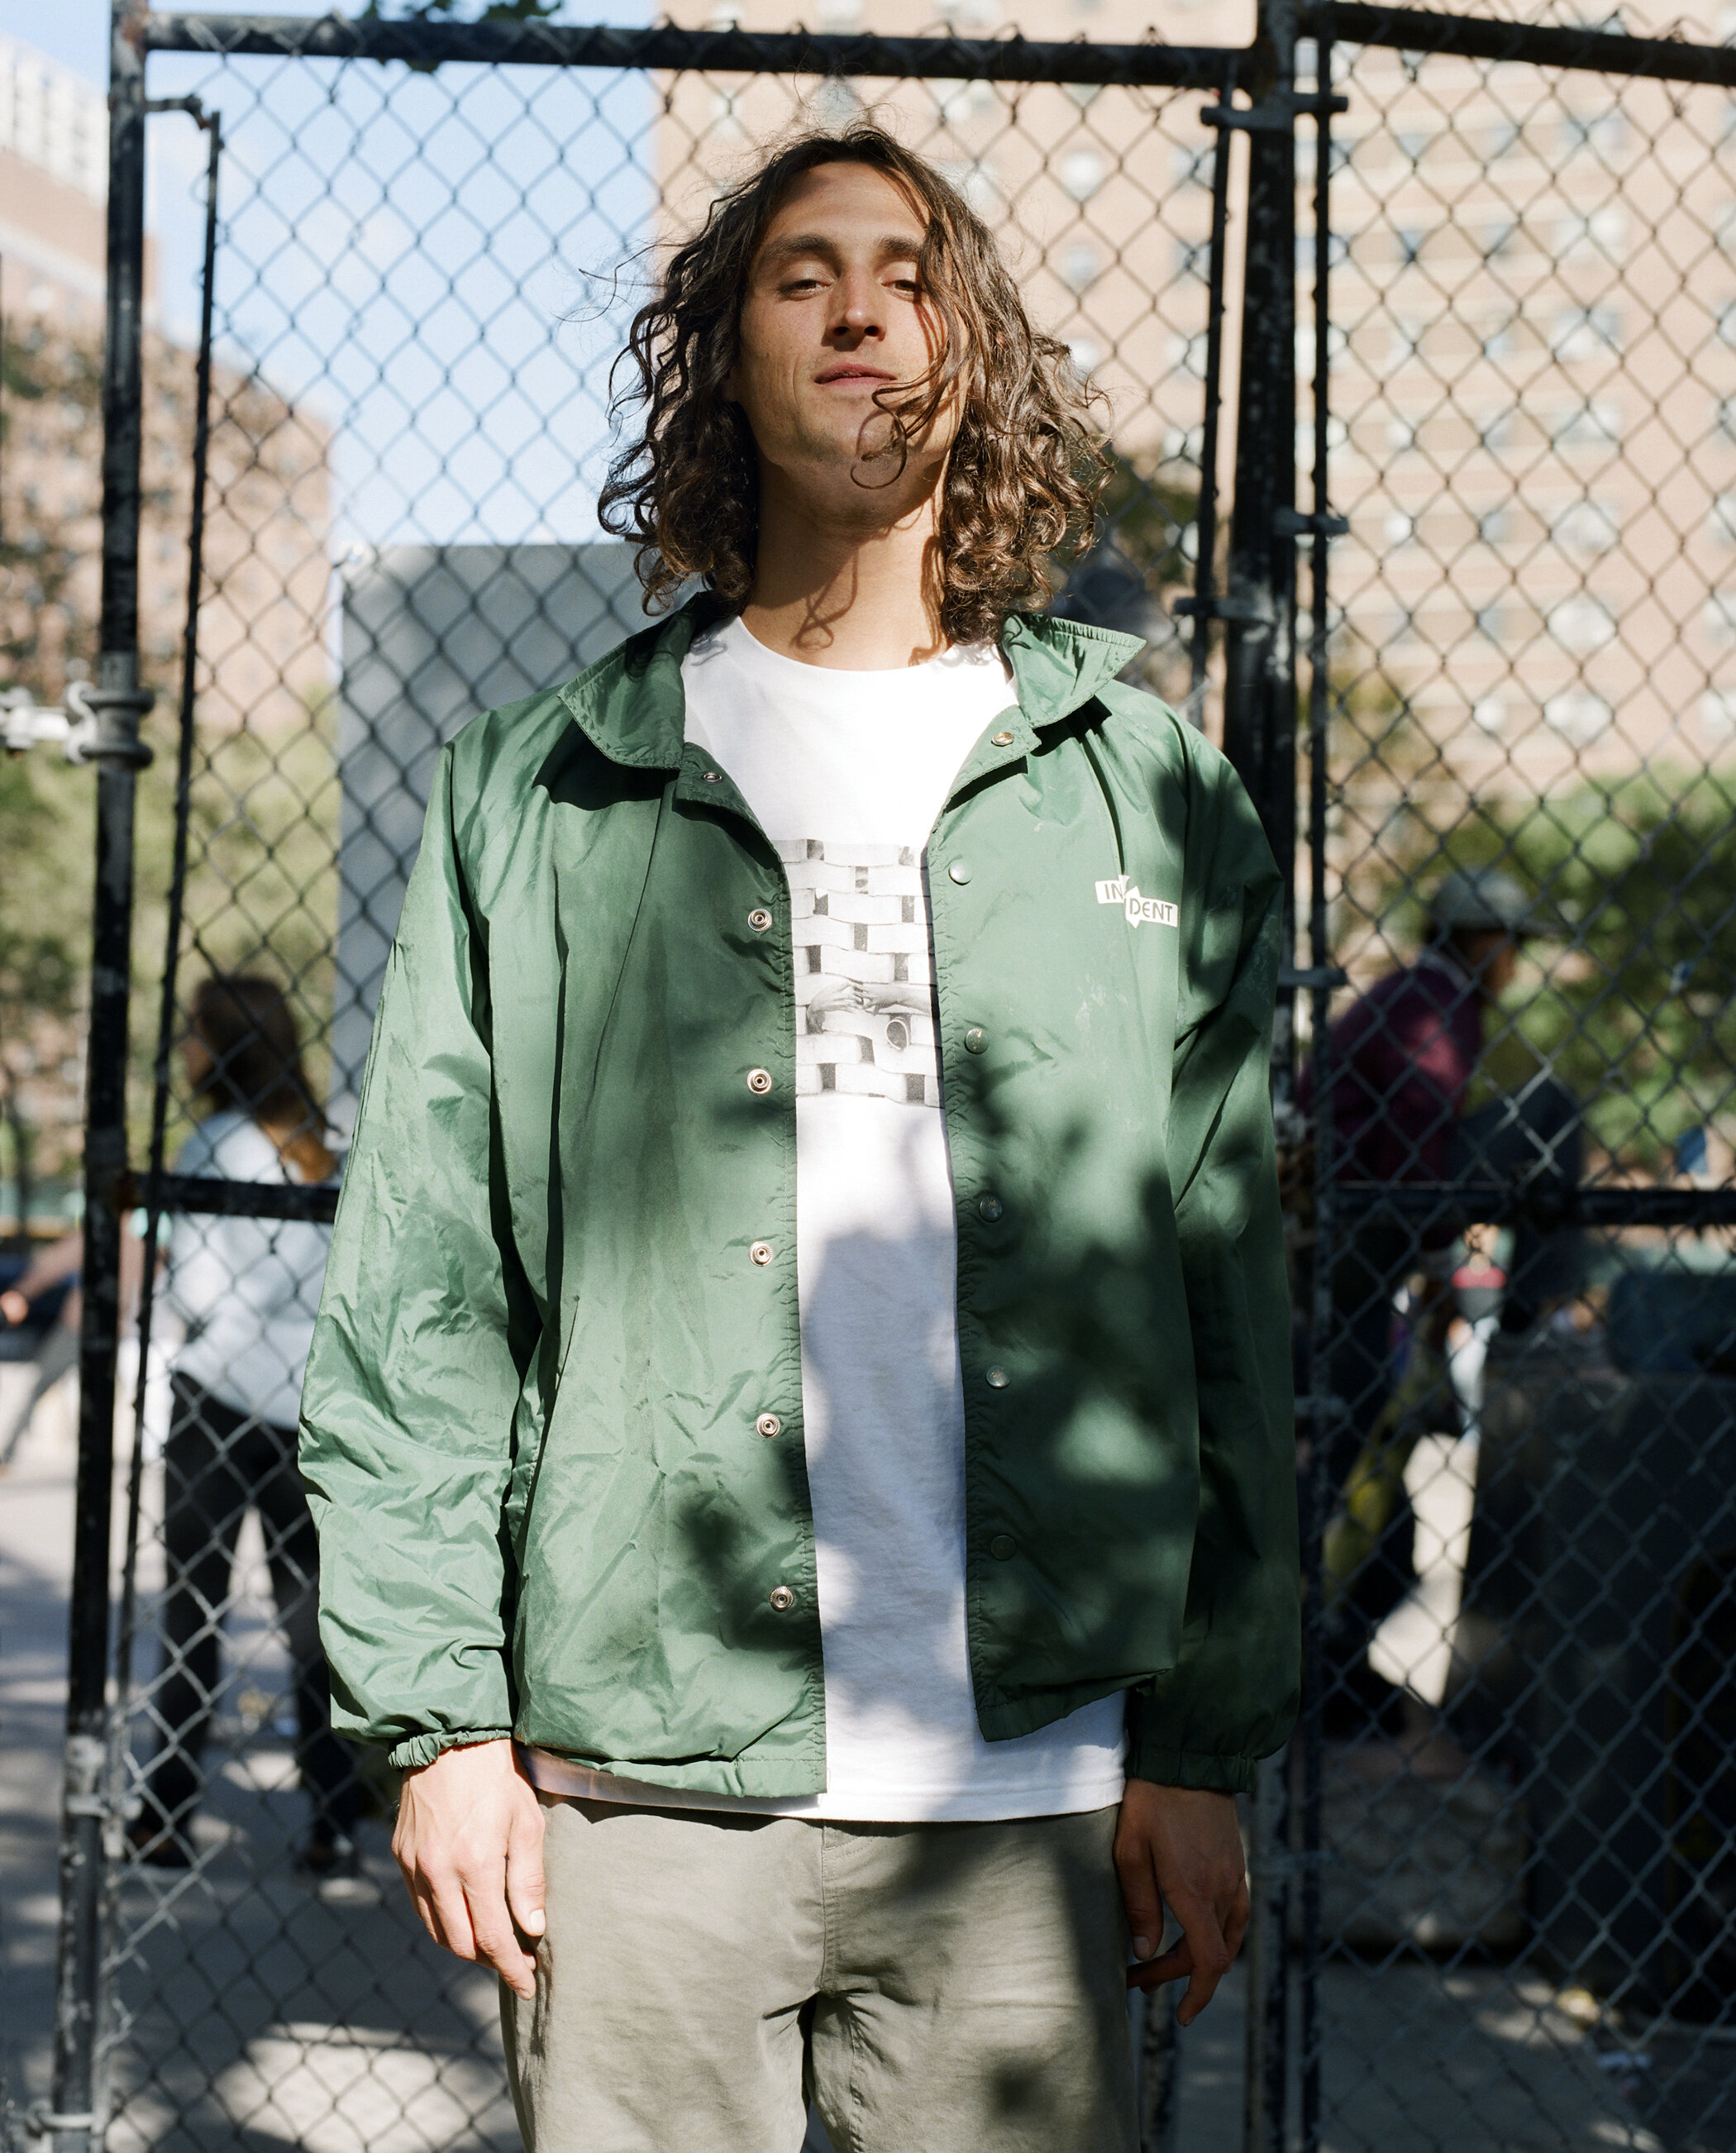  Evan Smith - Lower East Side, NY. 